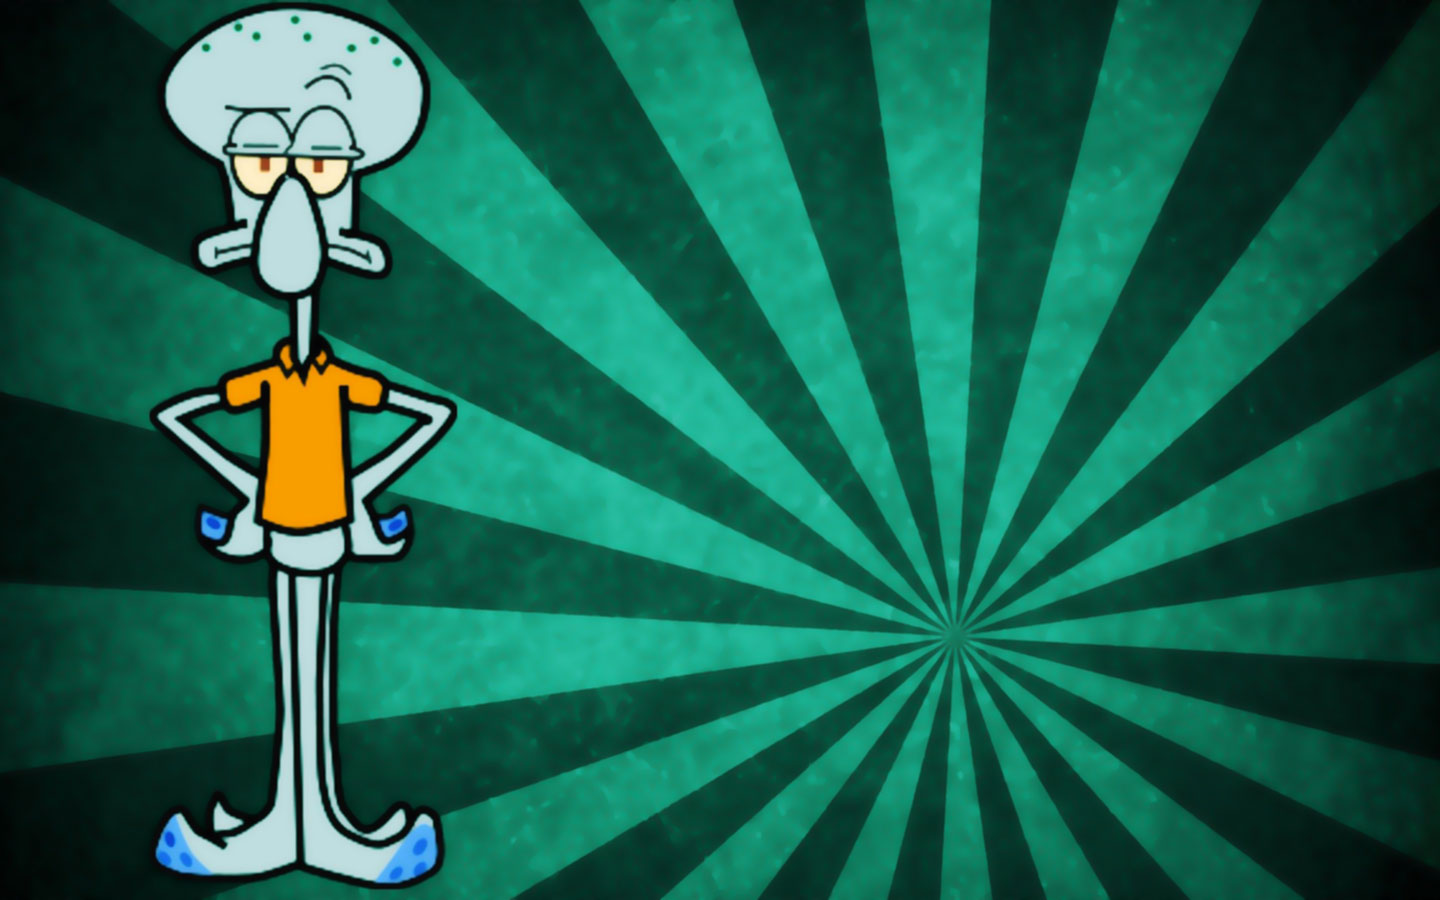 Free download free wallpapers squidward tentacles wallpaper x for your desktop mobile tablet explore squidward wallpaper handsome squidward wallpaper squidward dab wallpaper